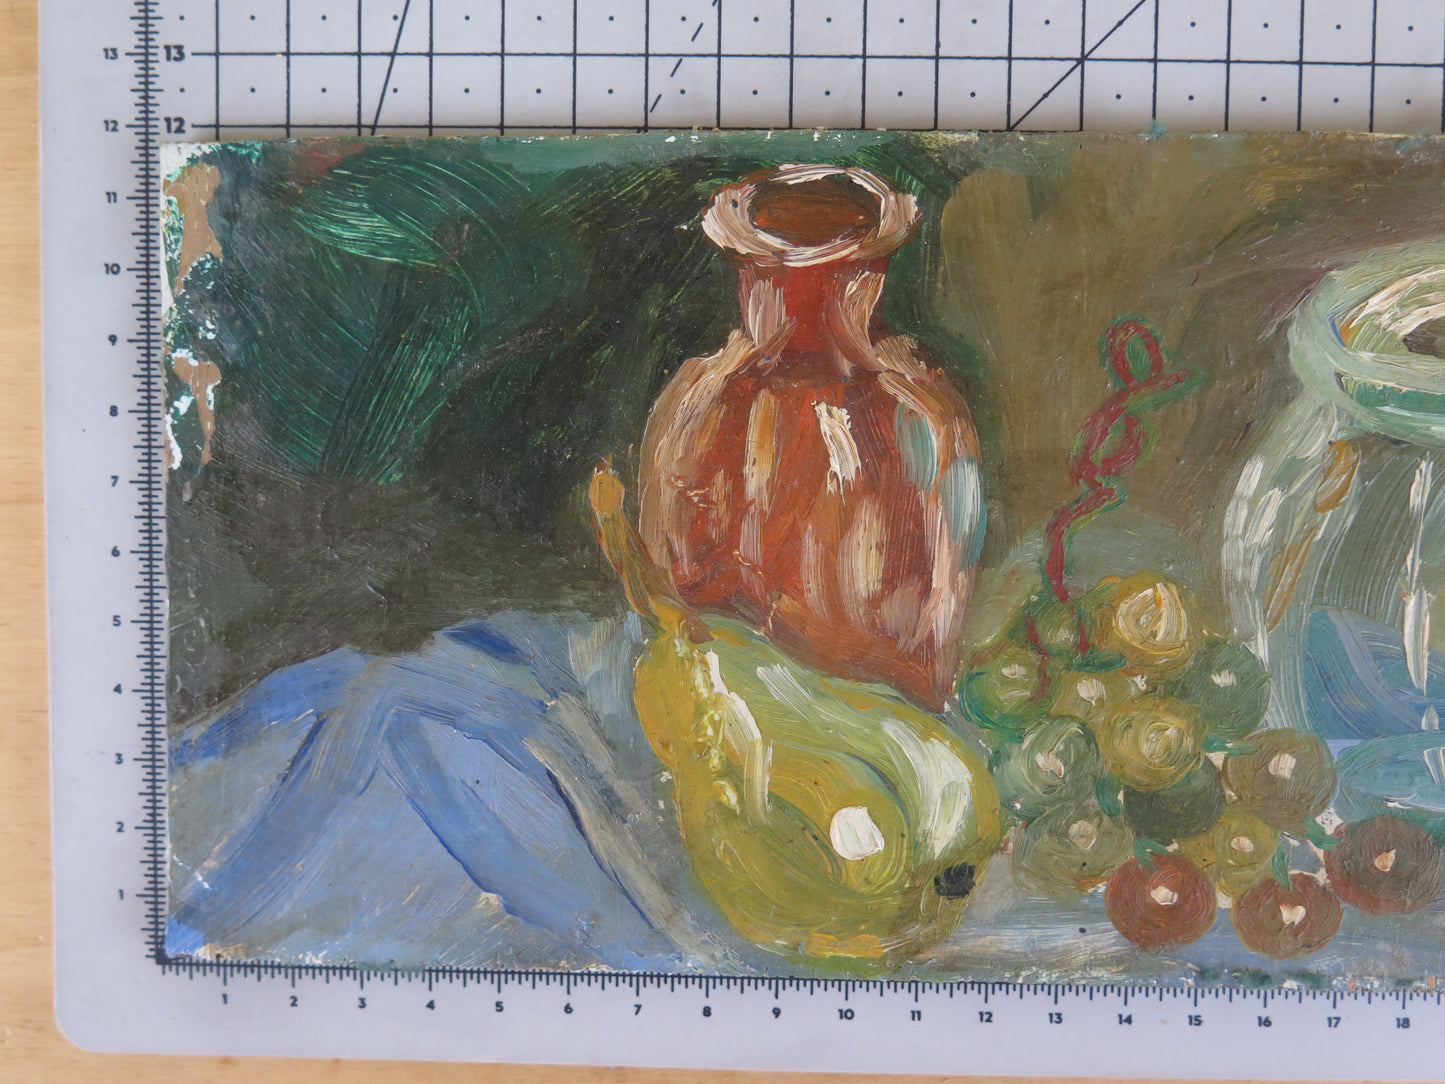 28x12 cm OLD OIL PAINTING ON TABLE INTERIOR STILL LIFE TABLE OBJECTS MD12